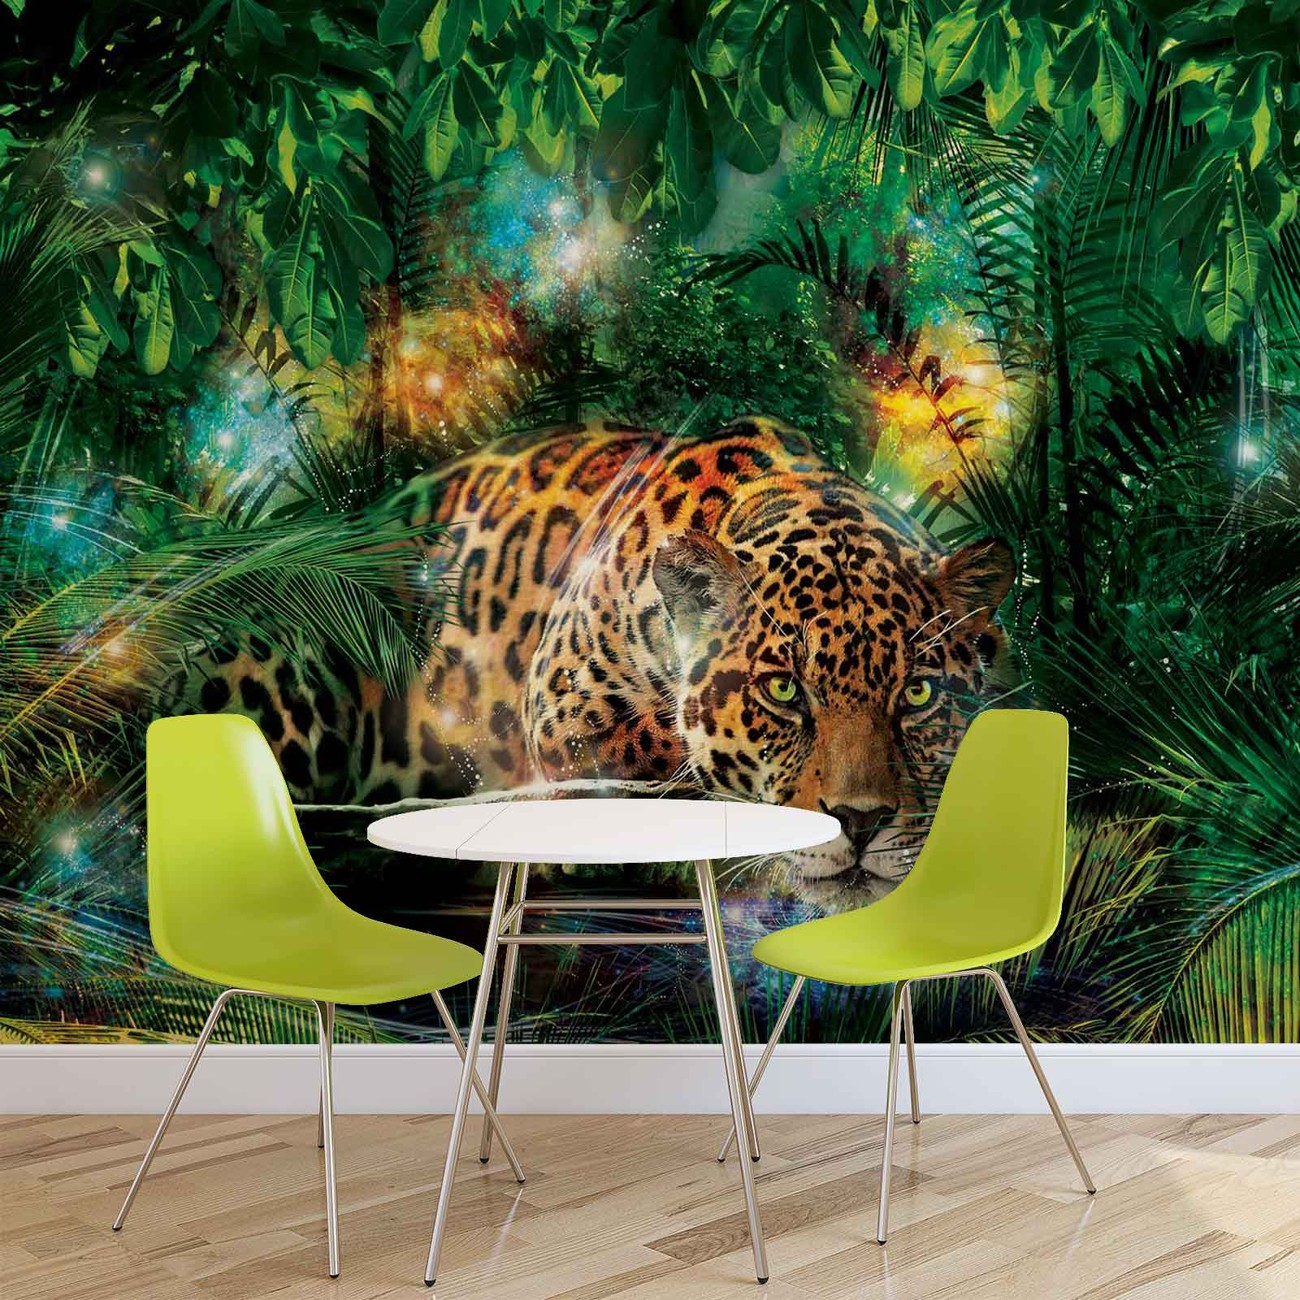 Leopard In Jungle Wall Paper Mural | Buy at EuroPosters